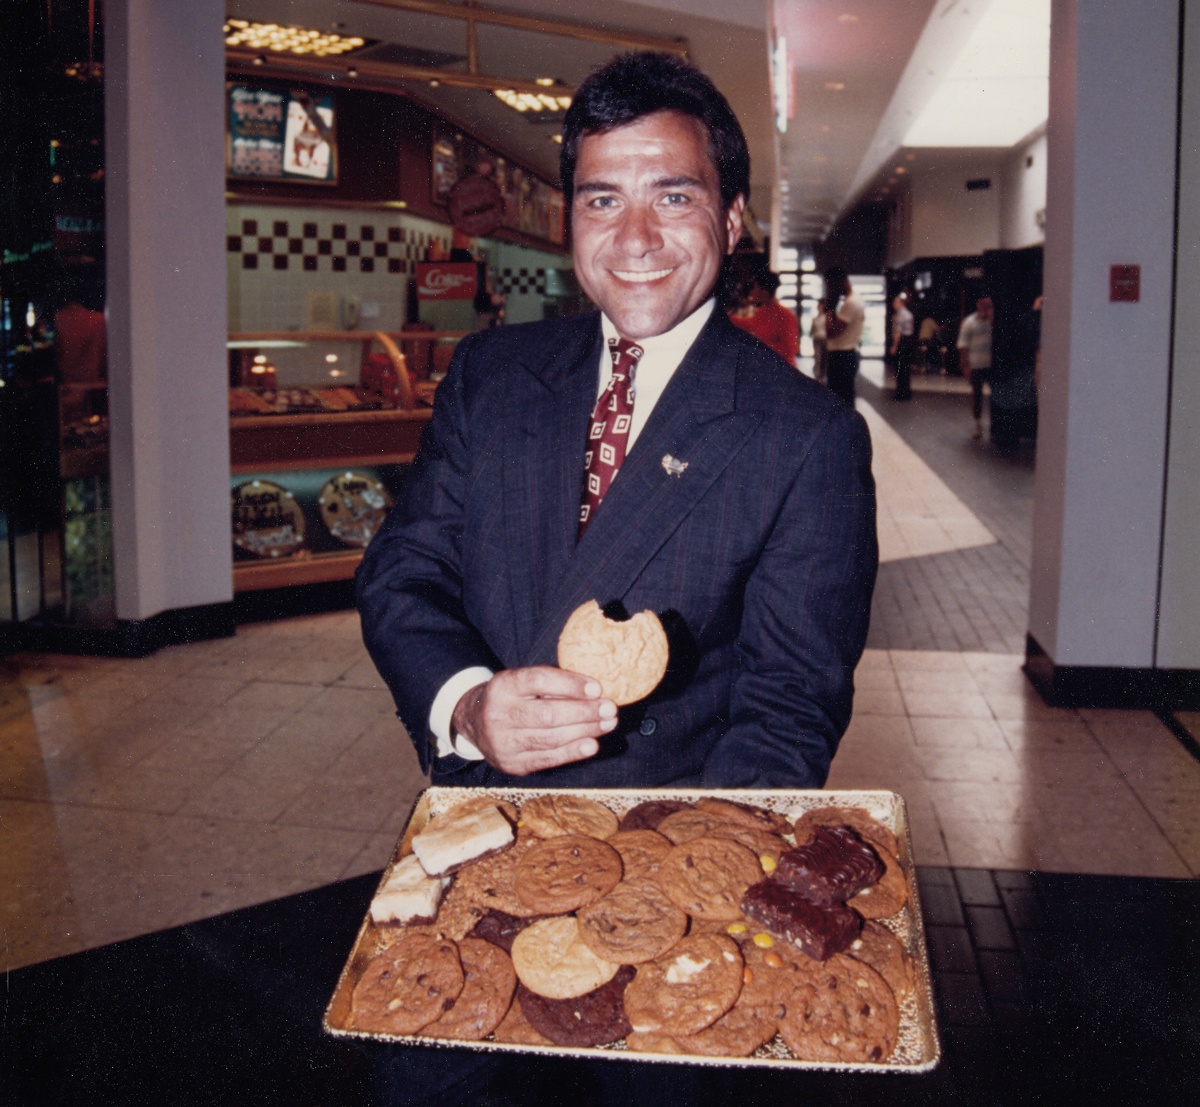 Michael Coles at Great American Cookie Company, 1994